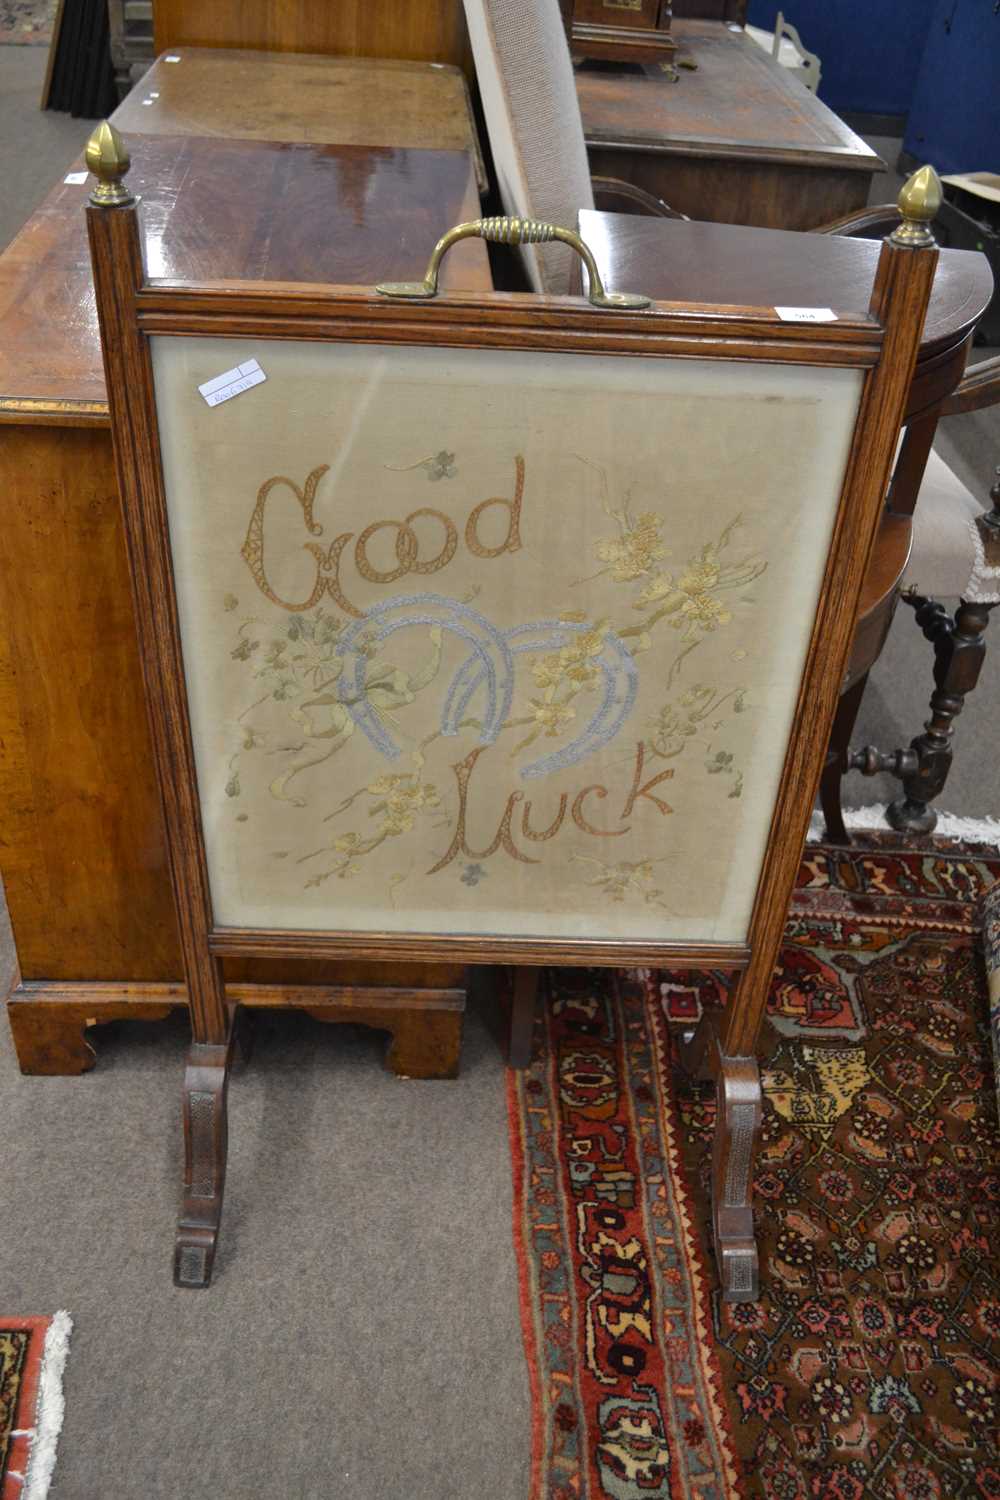 Late 19th/early 20th Century oak framed fire screen with central needlework panel marked 'Good